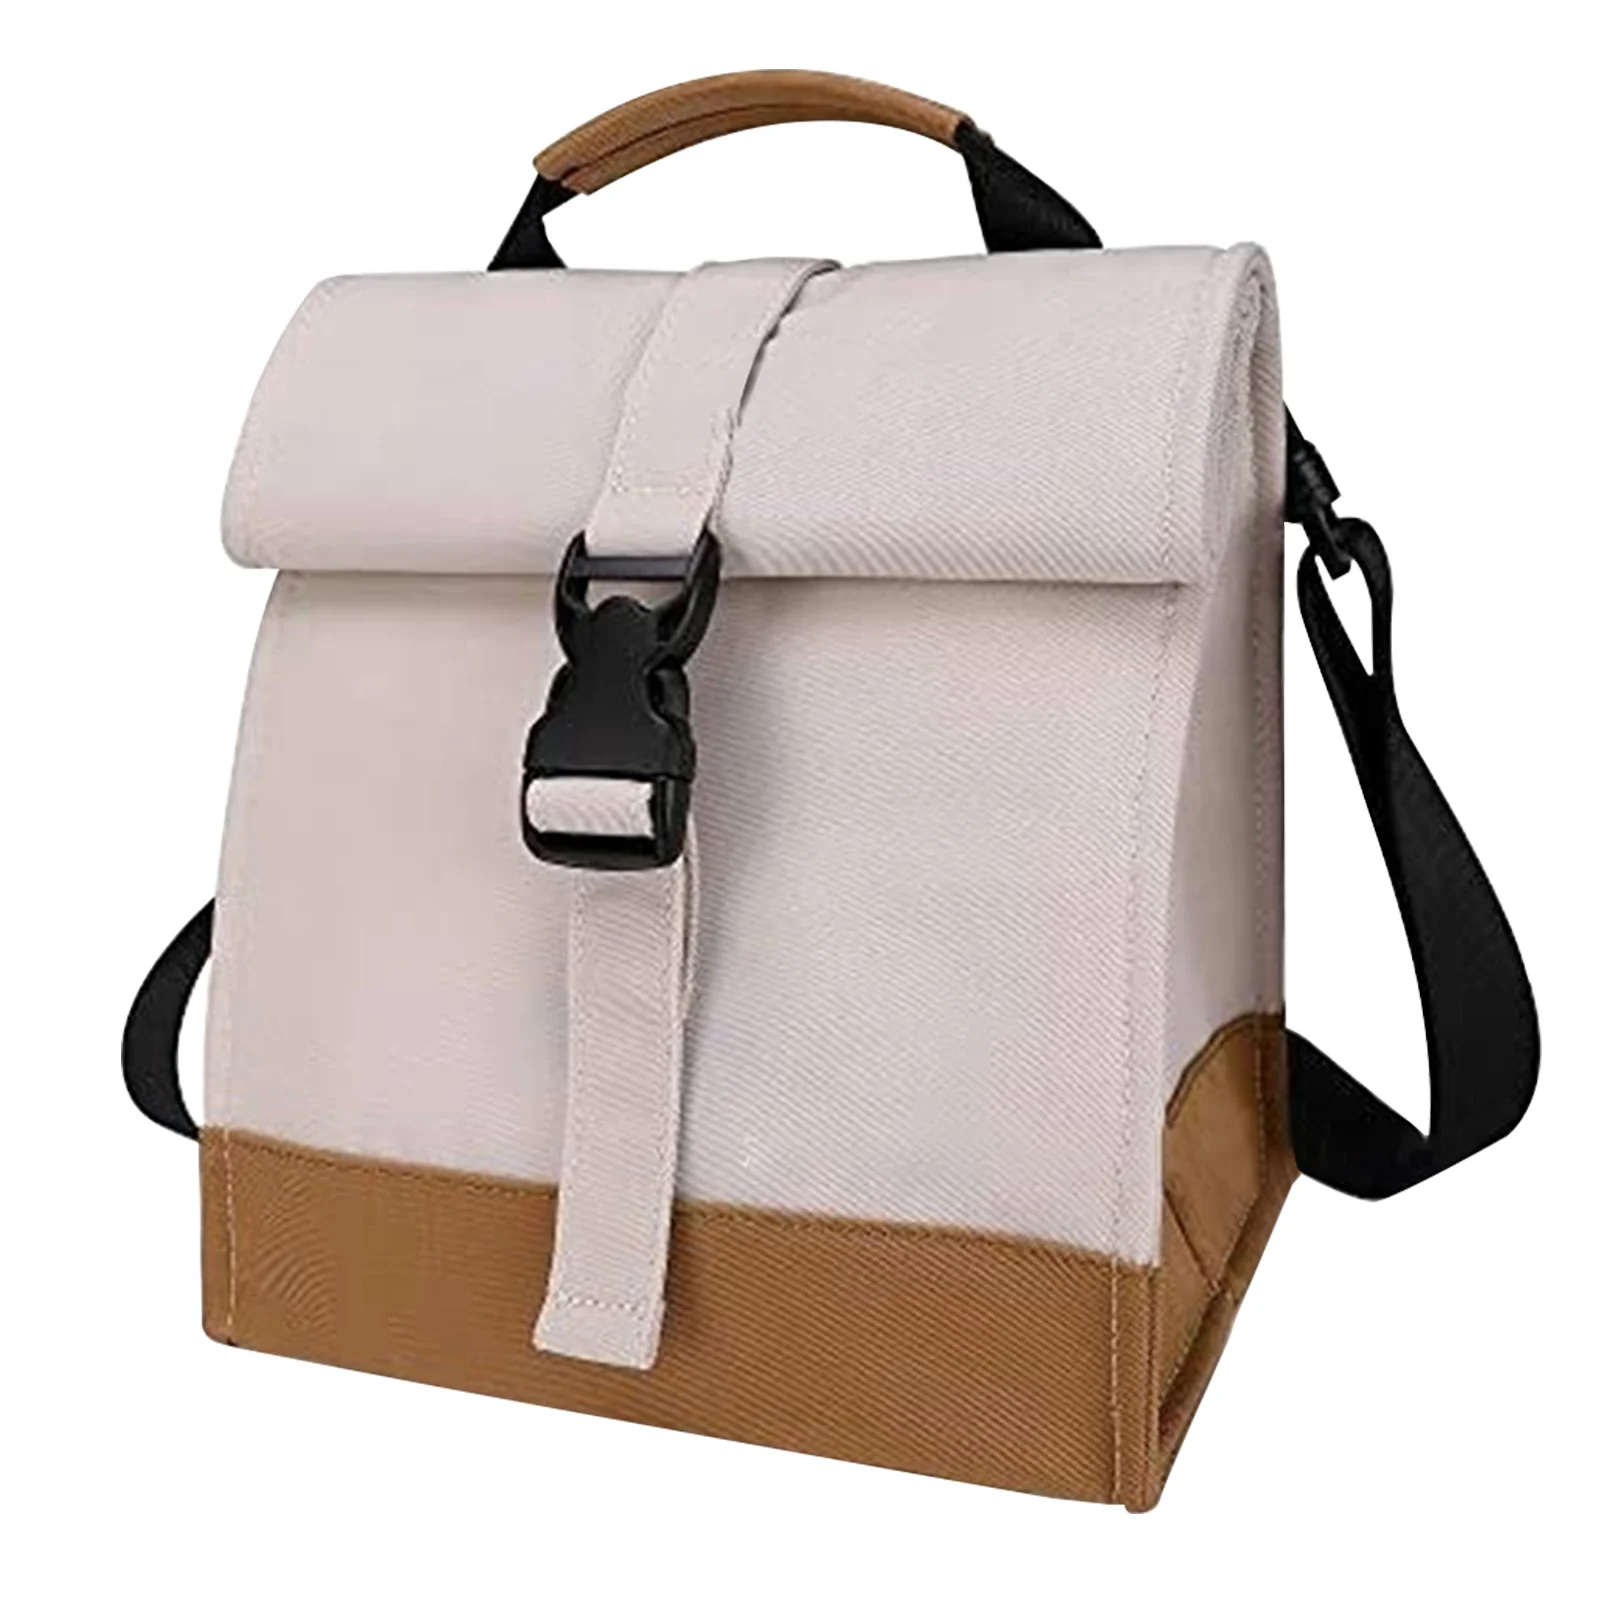 Outdoor Meal Adjustable Shoulder Strap Work Cooler Office School Tote With Handle Lunch Bag Insulated Thermal Lunchbox Roll Top